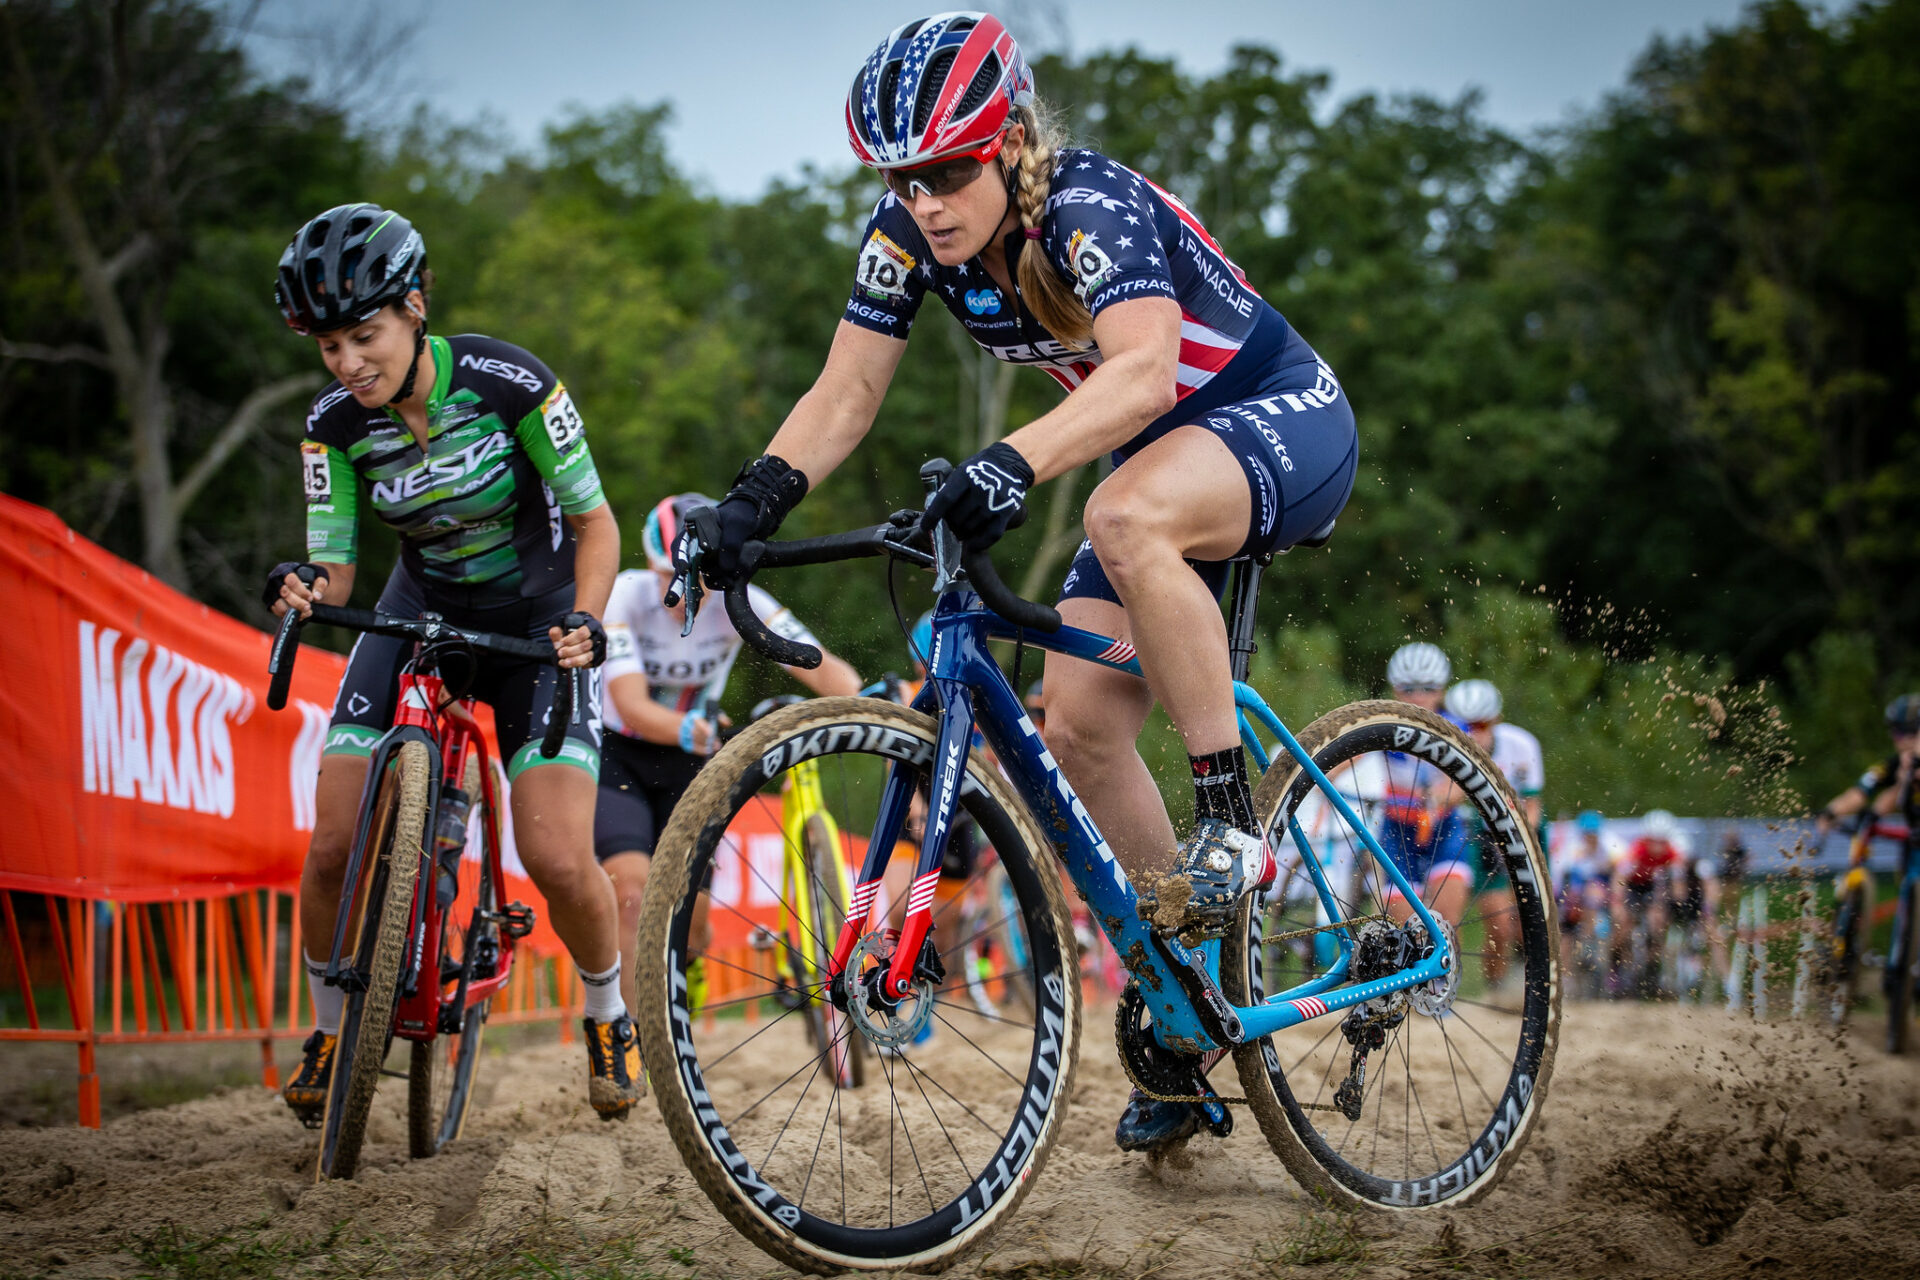 The Cyclocross Episode with Coach Holicky, Katie Compton, Ellen Noble ...